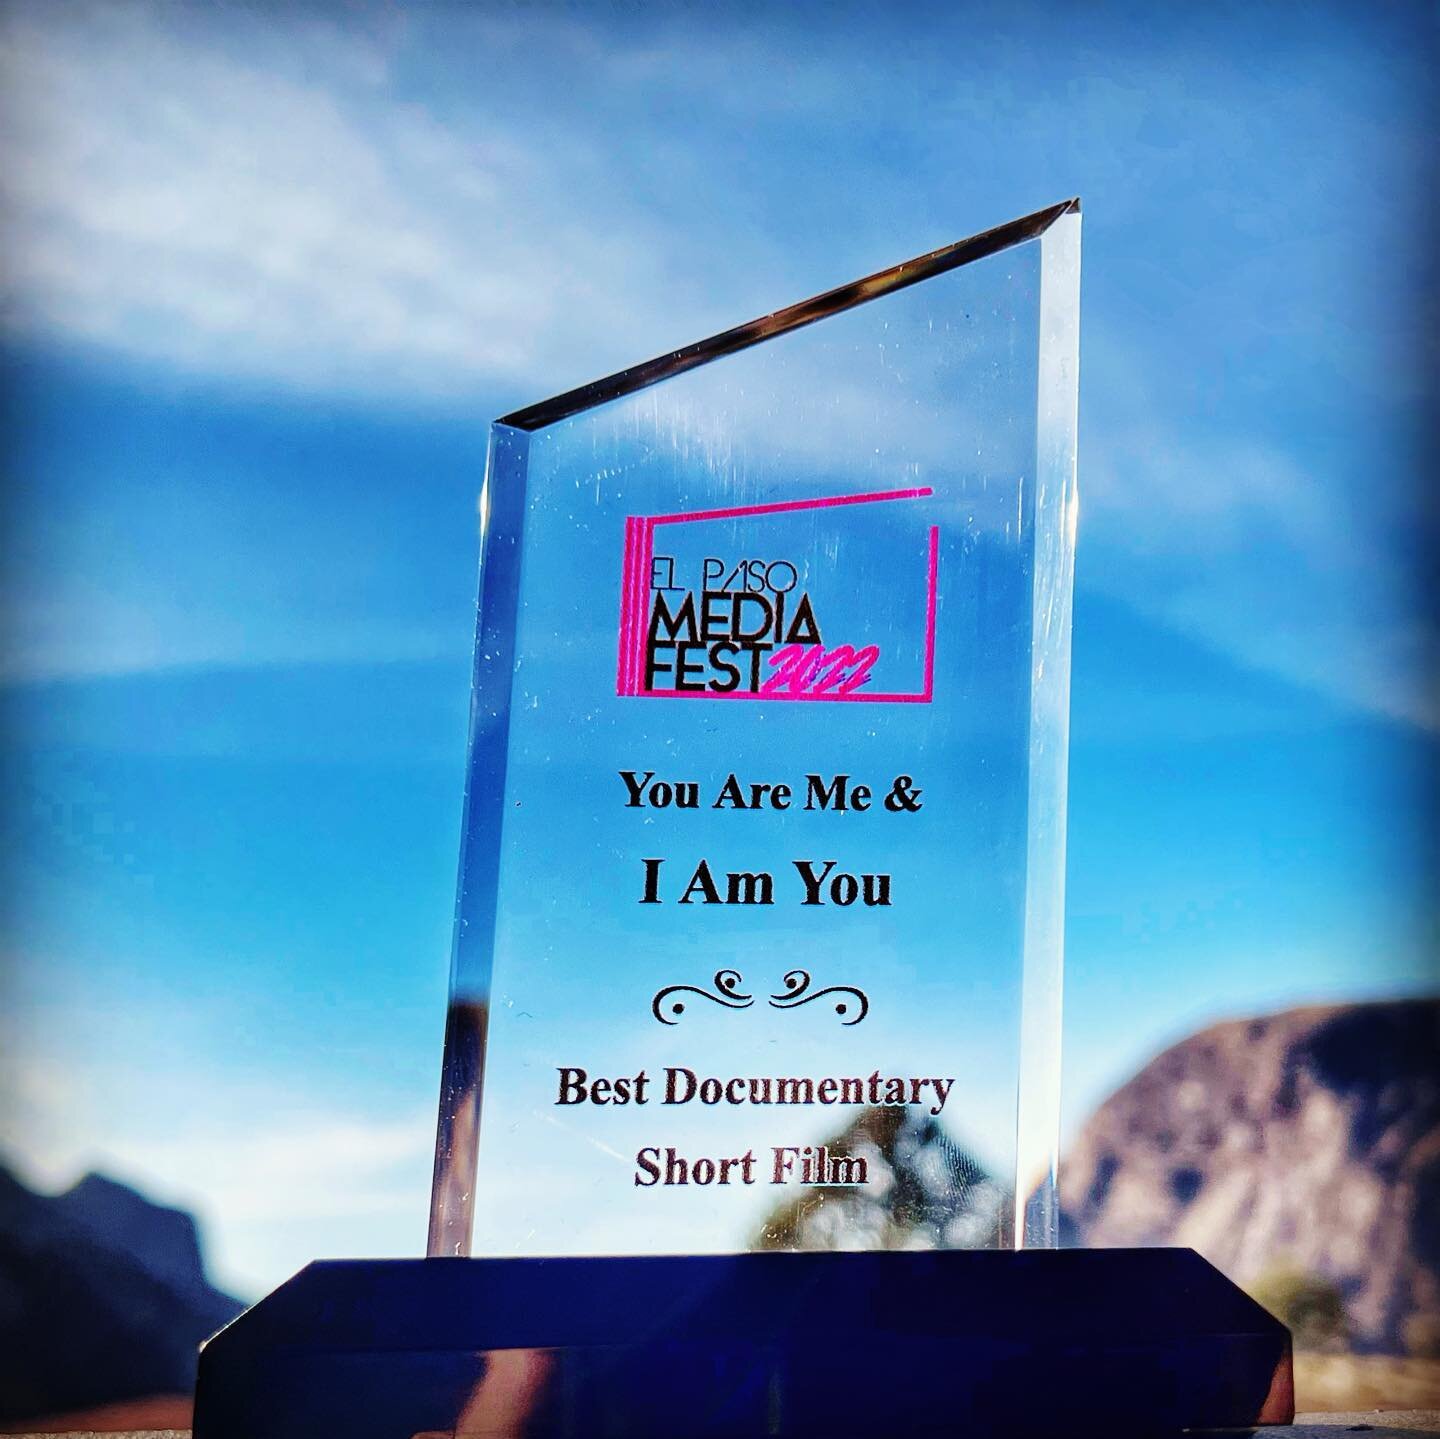 &ldquo;You are Me &amp; I am You&rdquo; WON Best Documentary Short!!! At the El Paso Media Fest last night!!!! Yipppeeee!!! Thank you so much #elpasomediafest for liking our little film with a big message!  And an even bigger thanks to my team who he